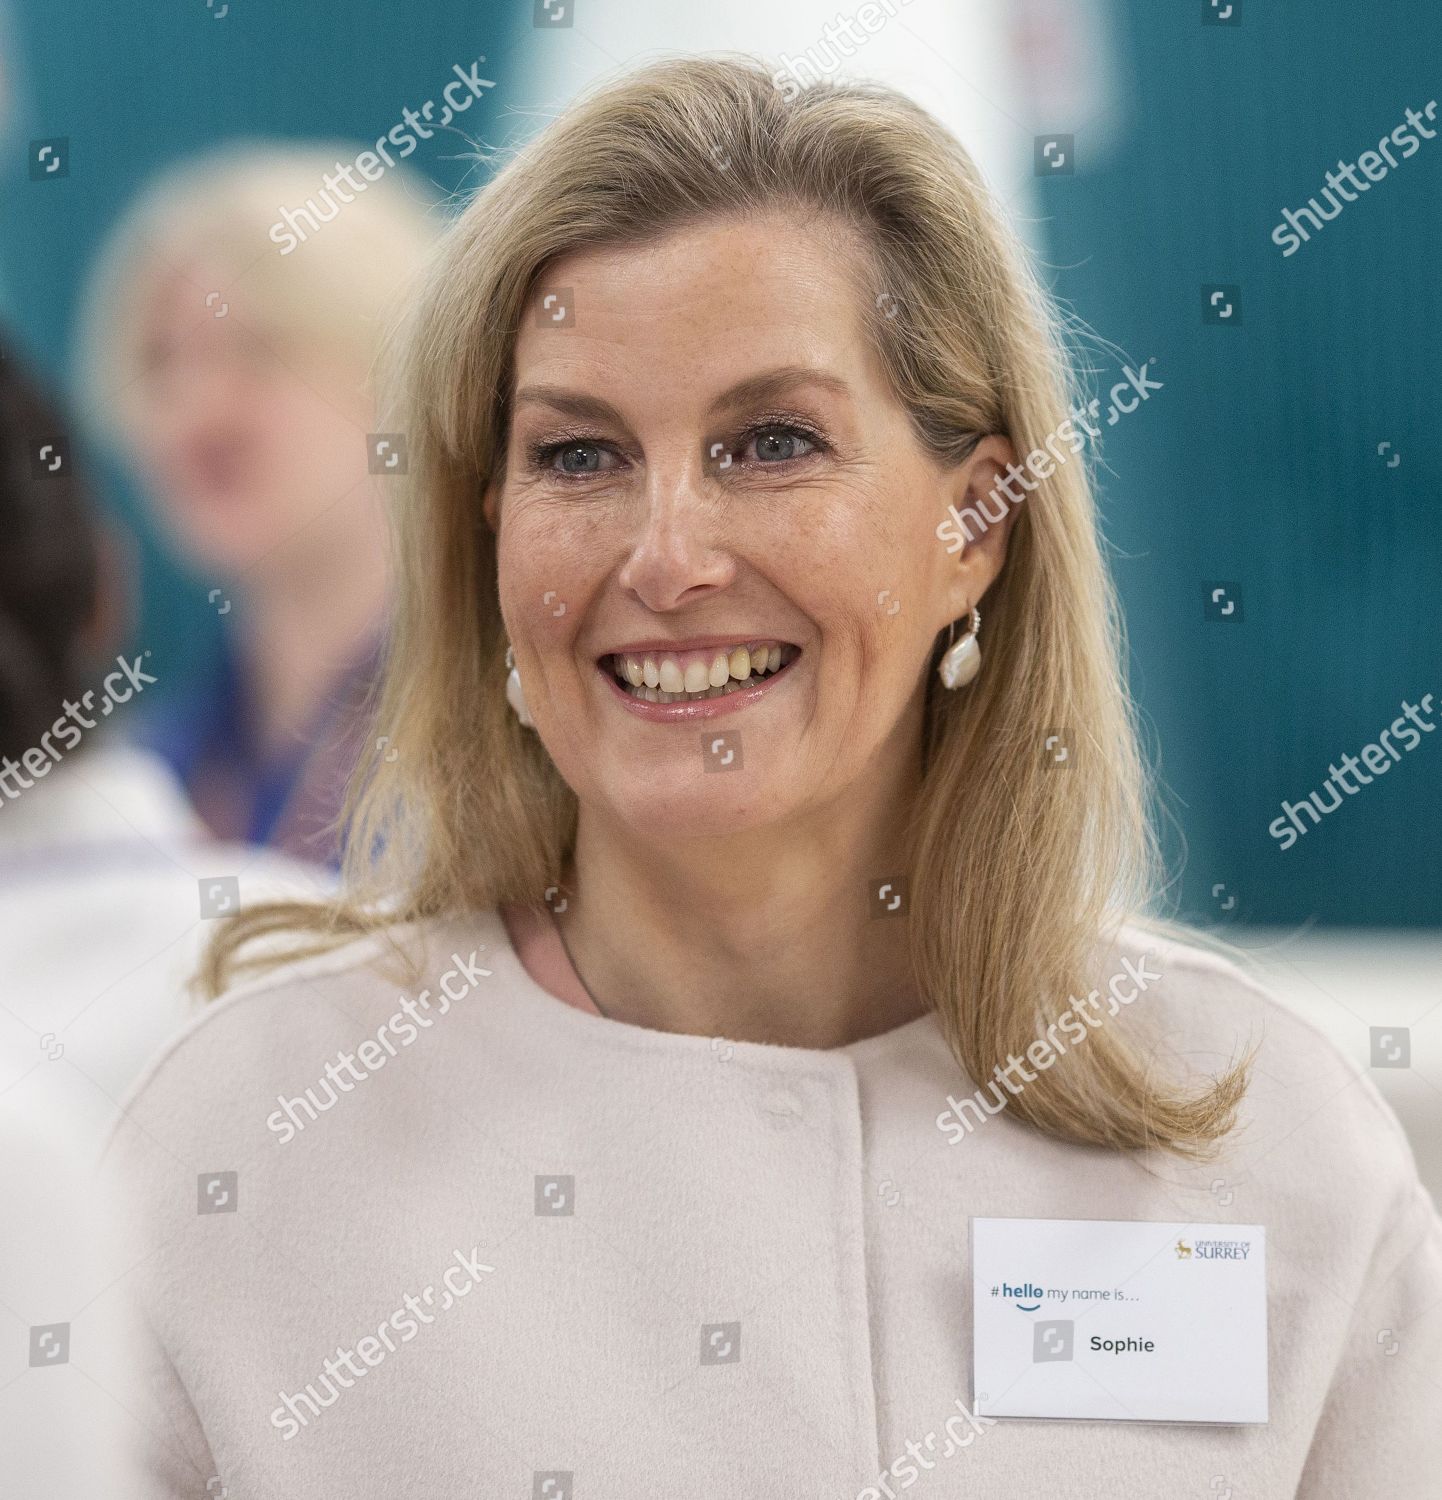 sophie-countess-of-wessex-opens-new-health-sciences-institute-university-of-surrey-guildford-uk-shutterstock-editorial-10542421at.jpg